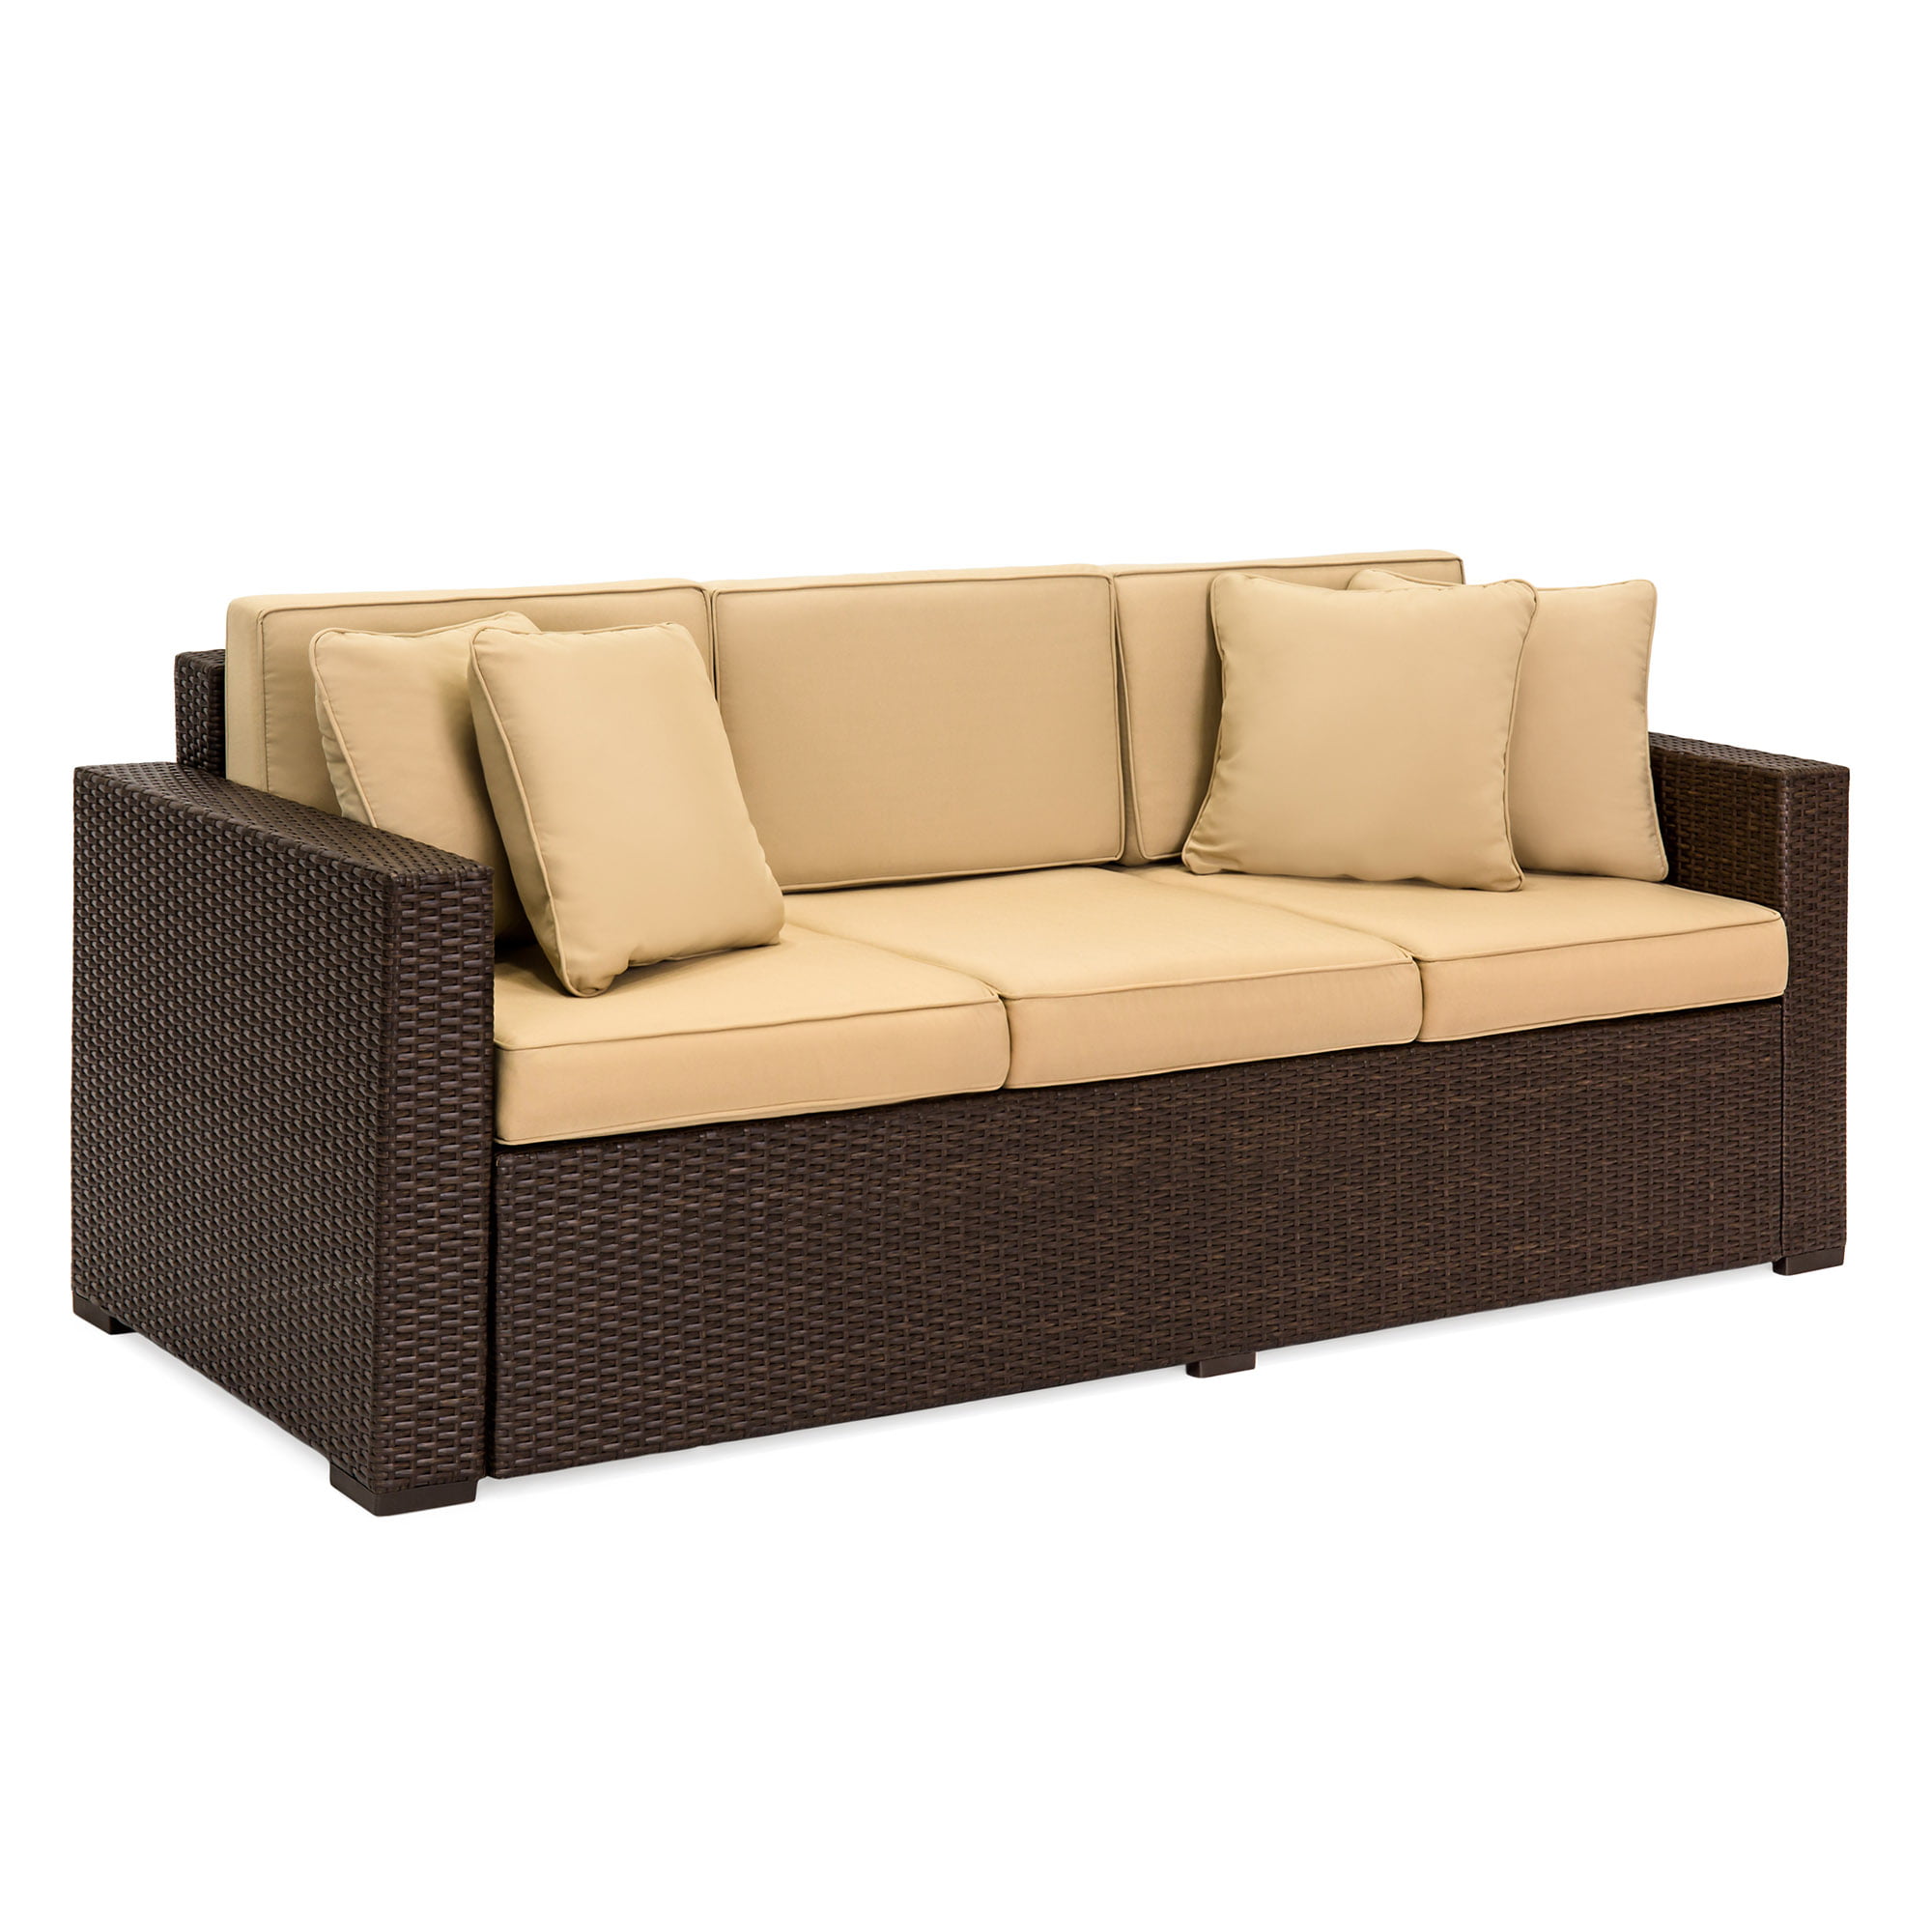 Best Choice Products 3-Seat Outdoor Wicker Sofa Couch Patio Furniture w